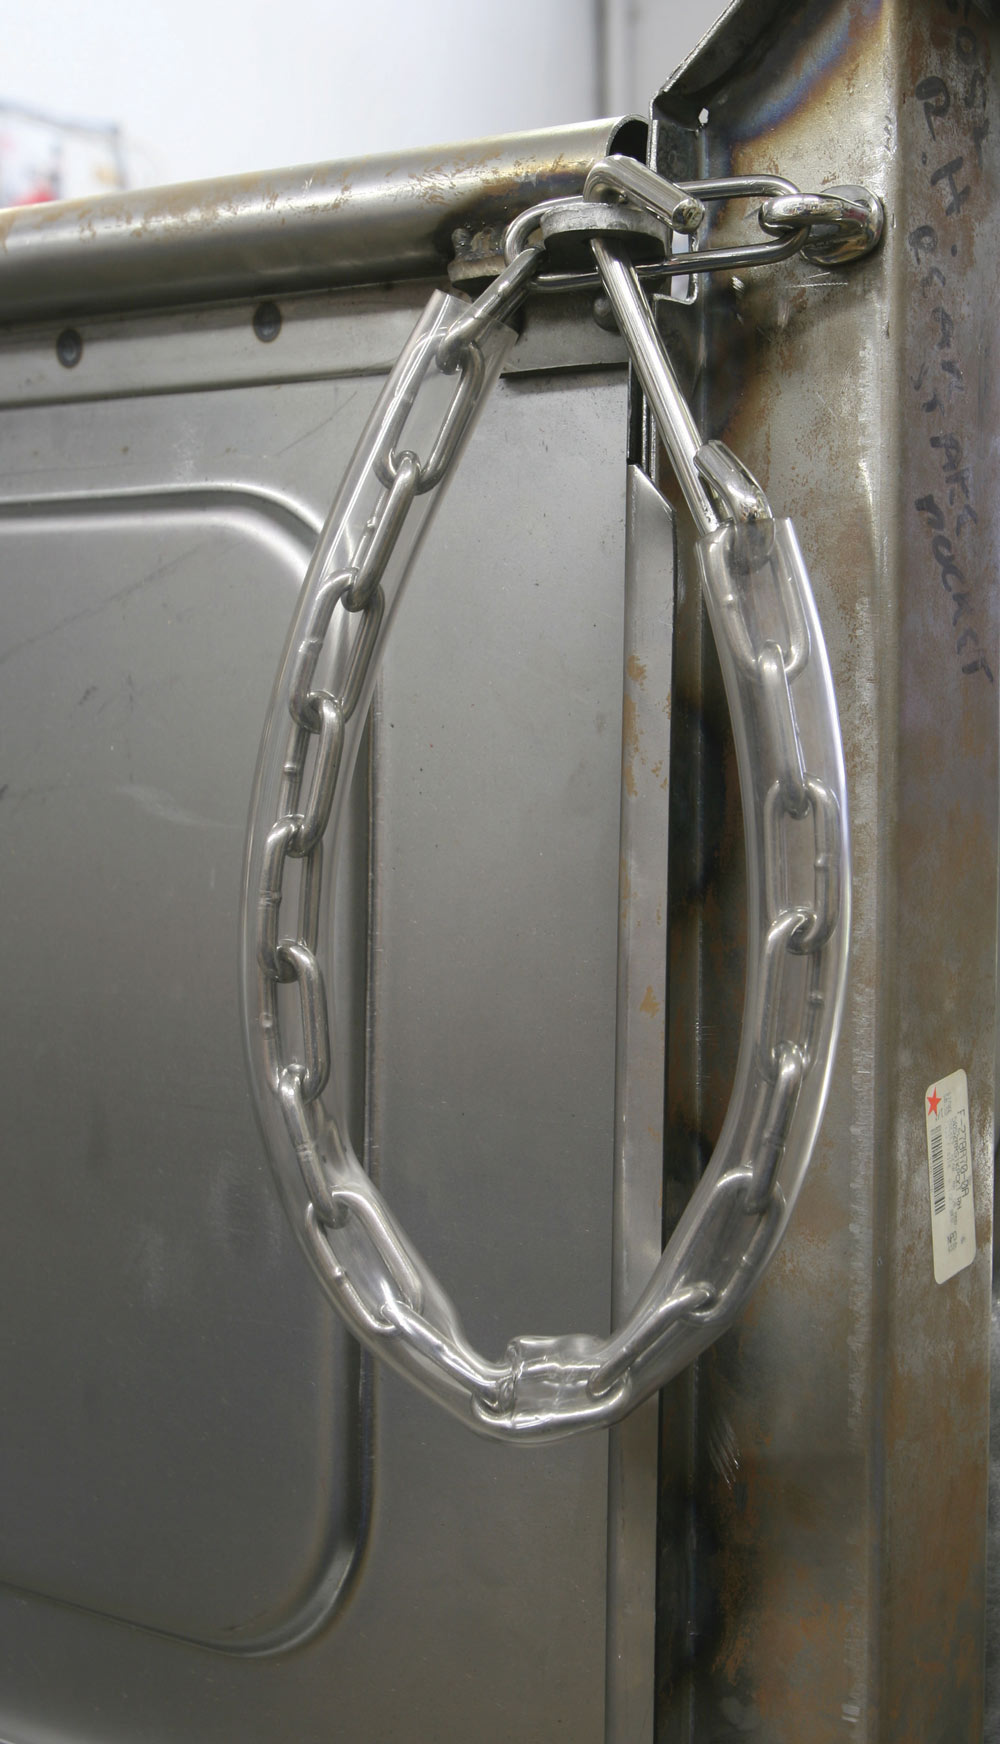 chain and hook arrangement as found on a ’52 Ford F-1 pickup